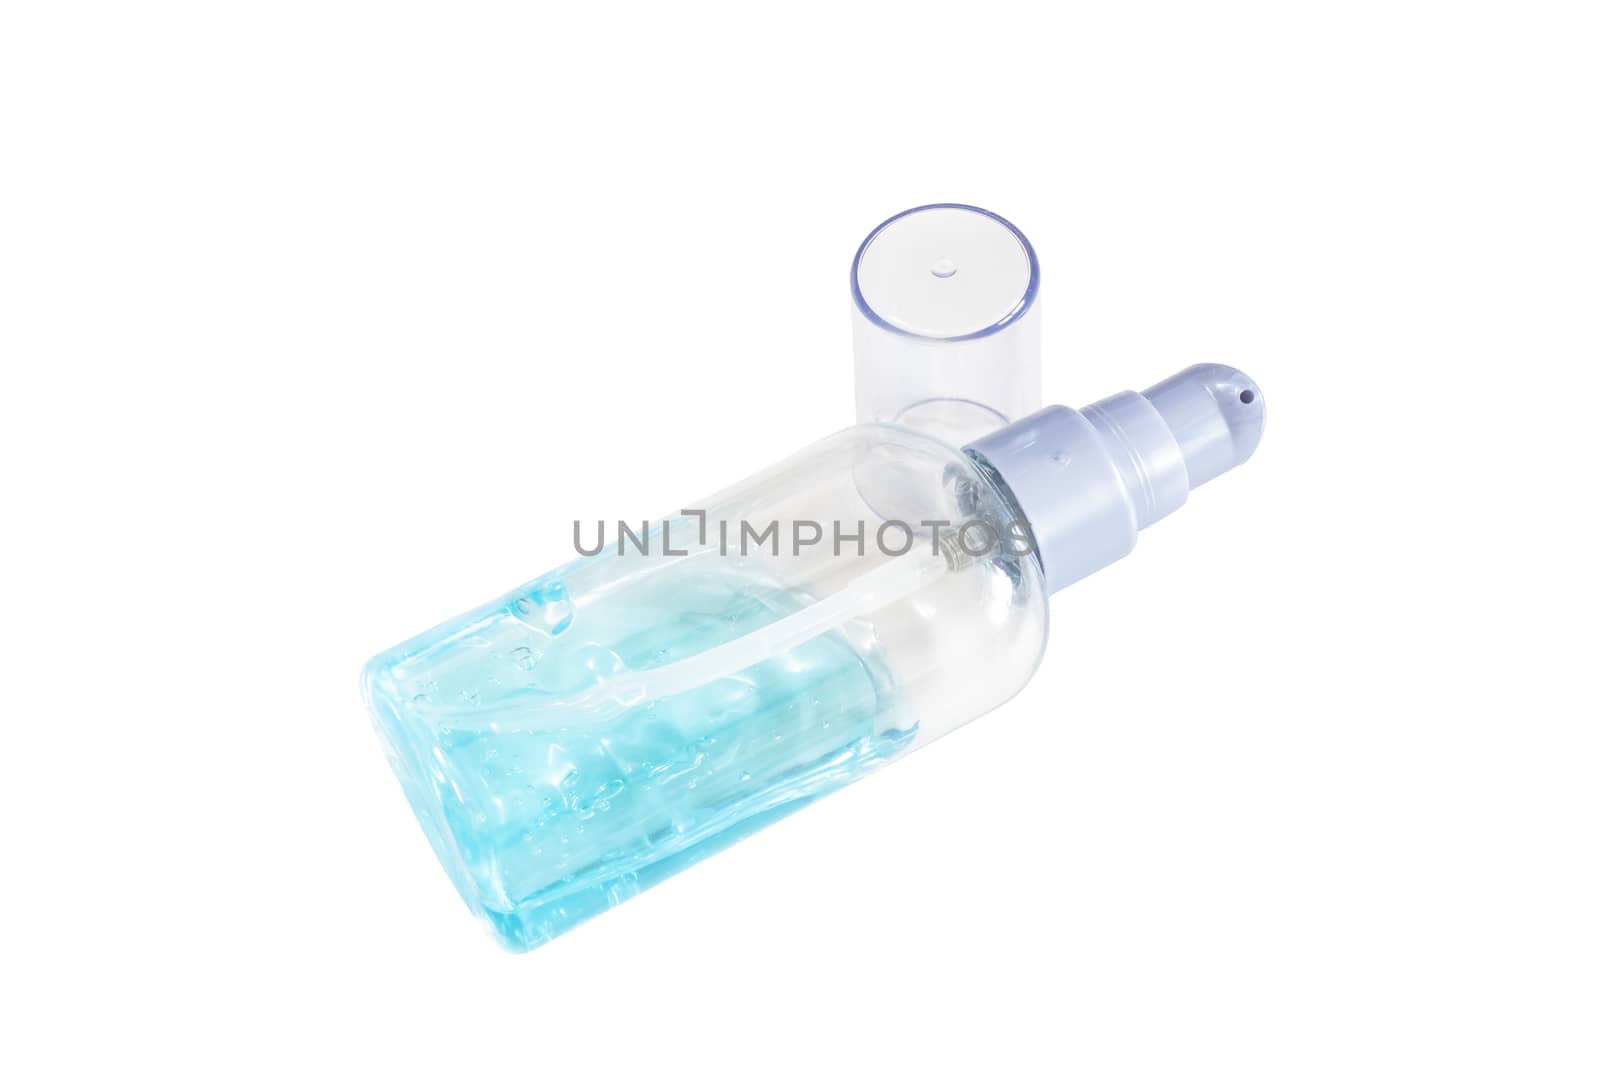 The close up of alcohol gel in small transparent plastic bottle on white background.